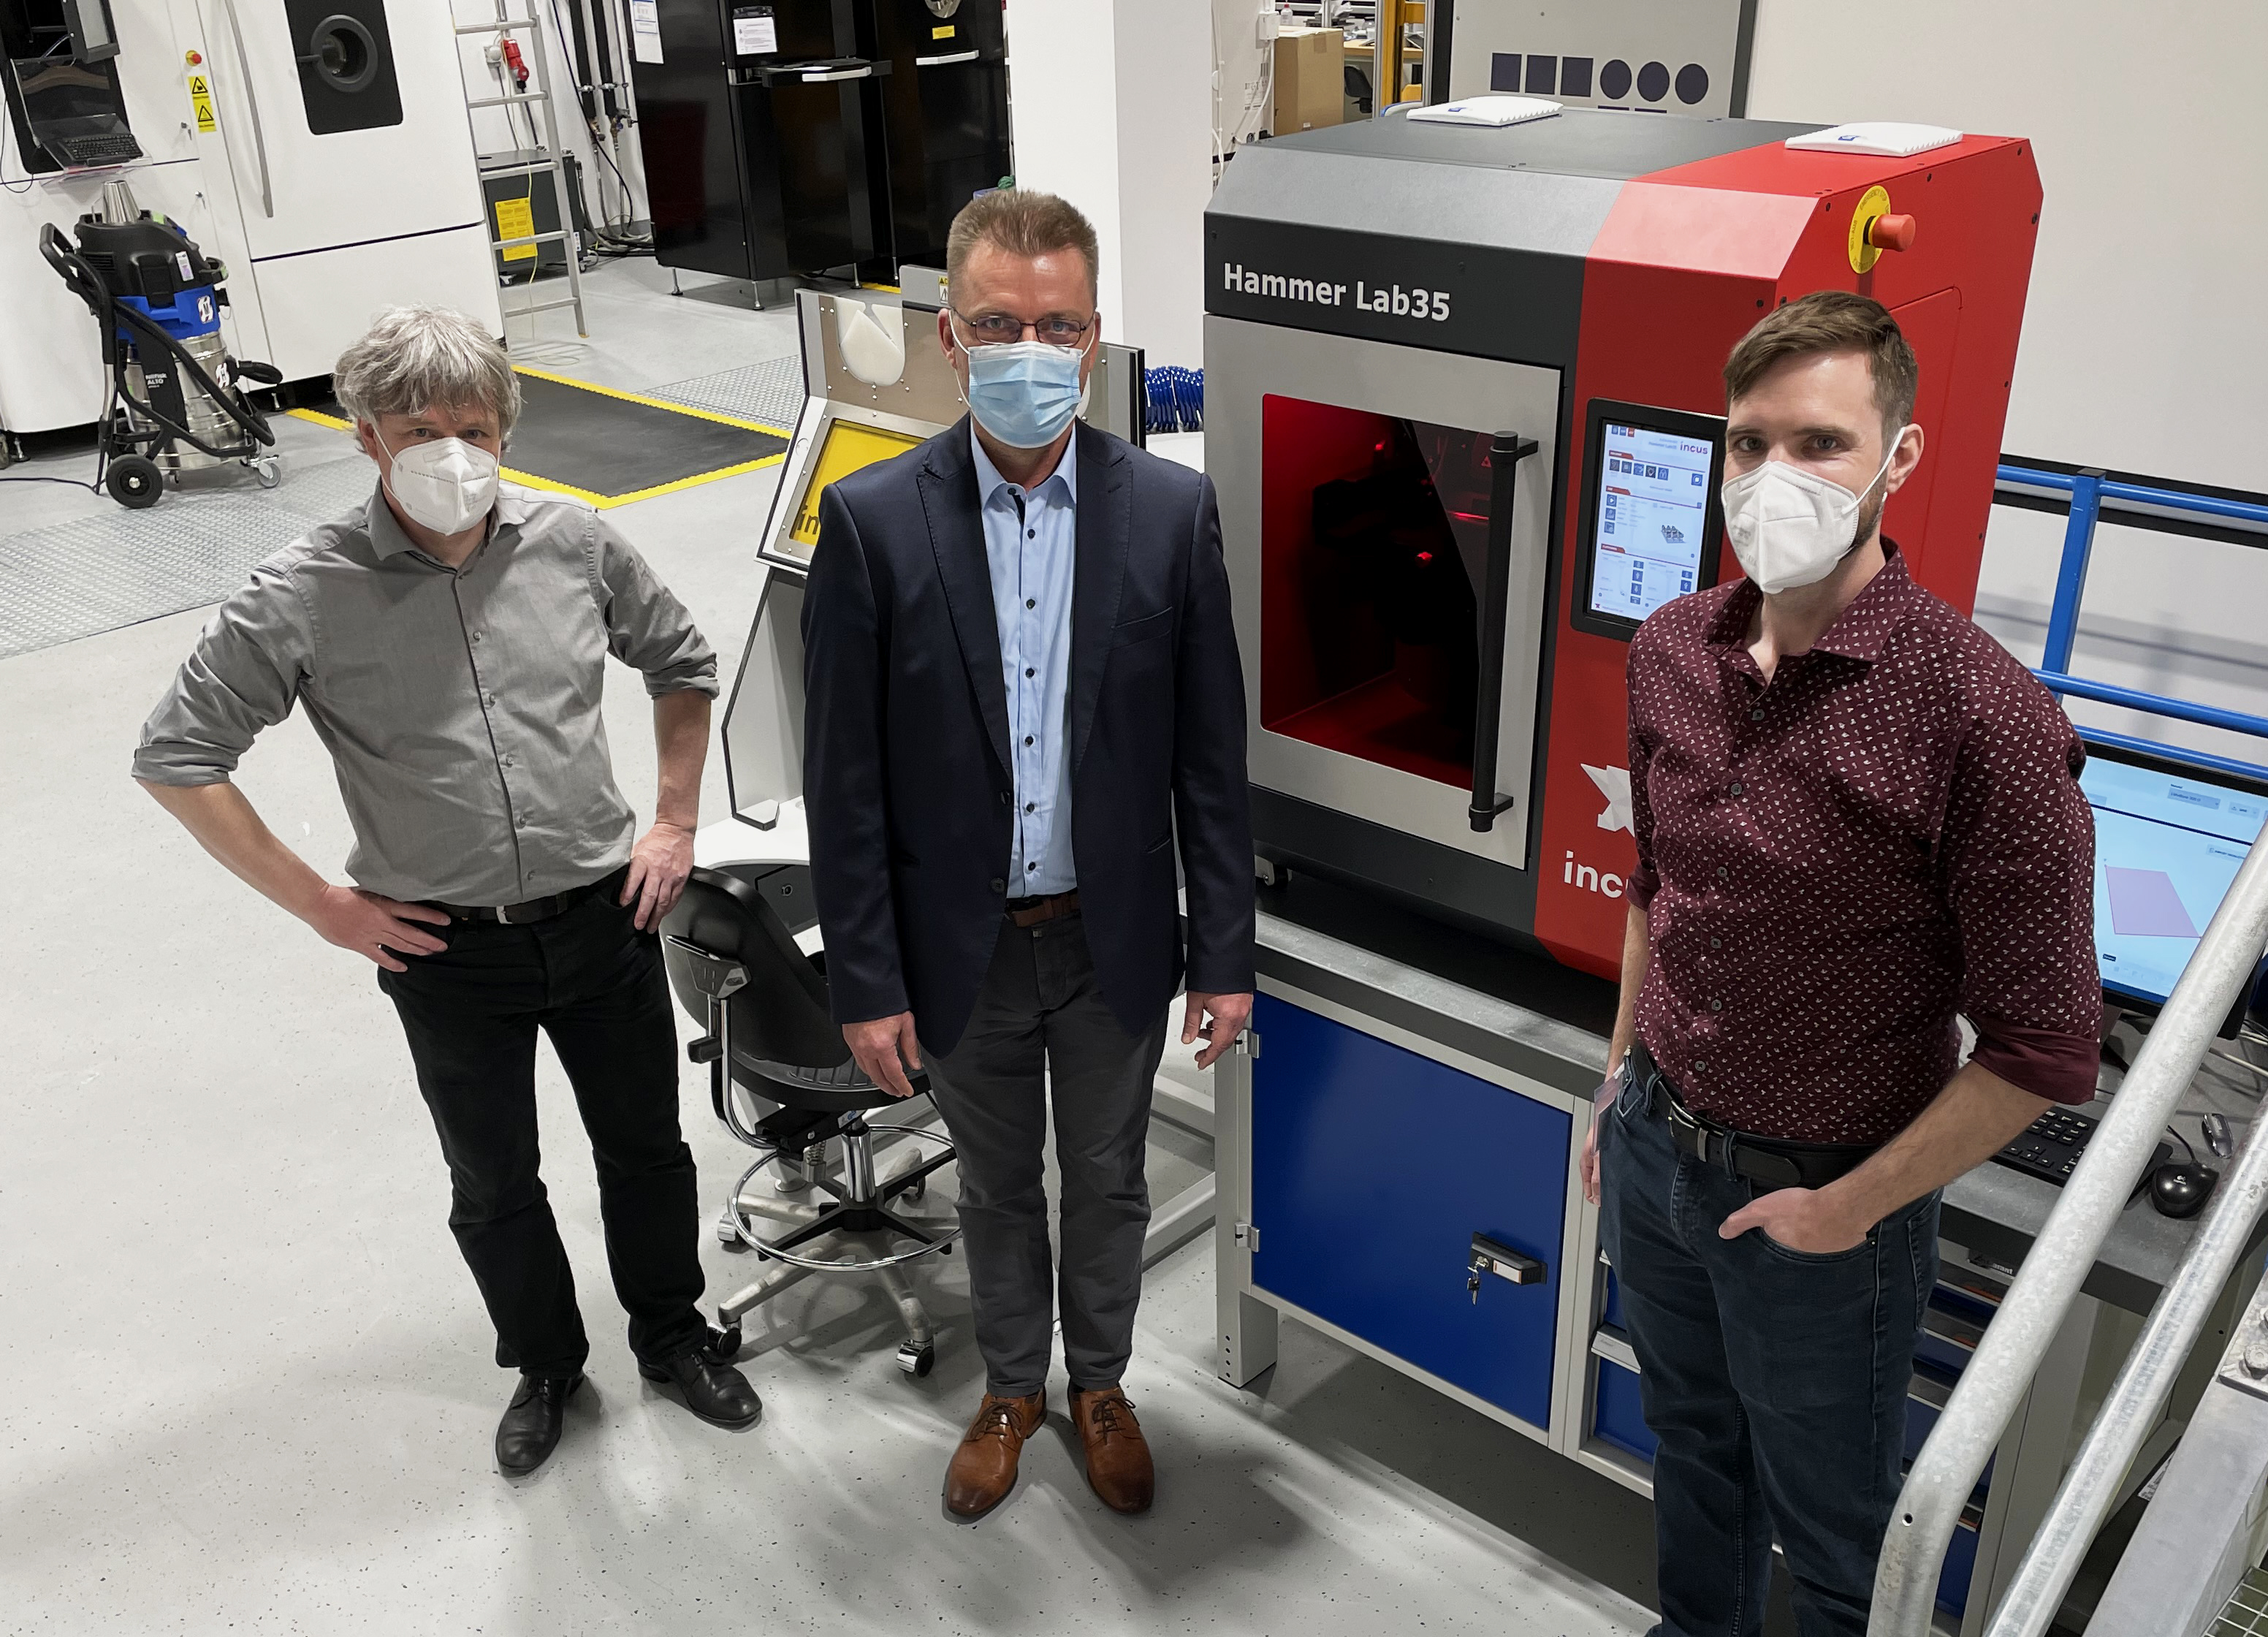 Dr. Thomas Studnitzky, group manager 3D Metal Printing, Dr. Thomas Weißgärber,  prov. director Fraunhofer IFAM Dresden, Dr. Gerald Mitteramskogler, CEO Incus GmbH, during the commissioning of the new LMM system at ICAM®.